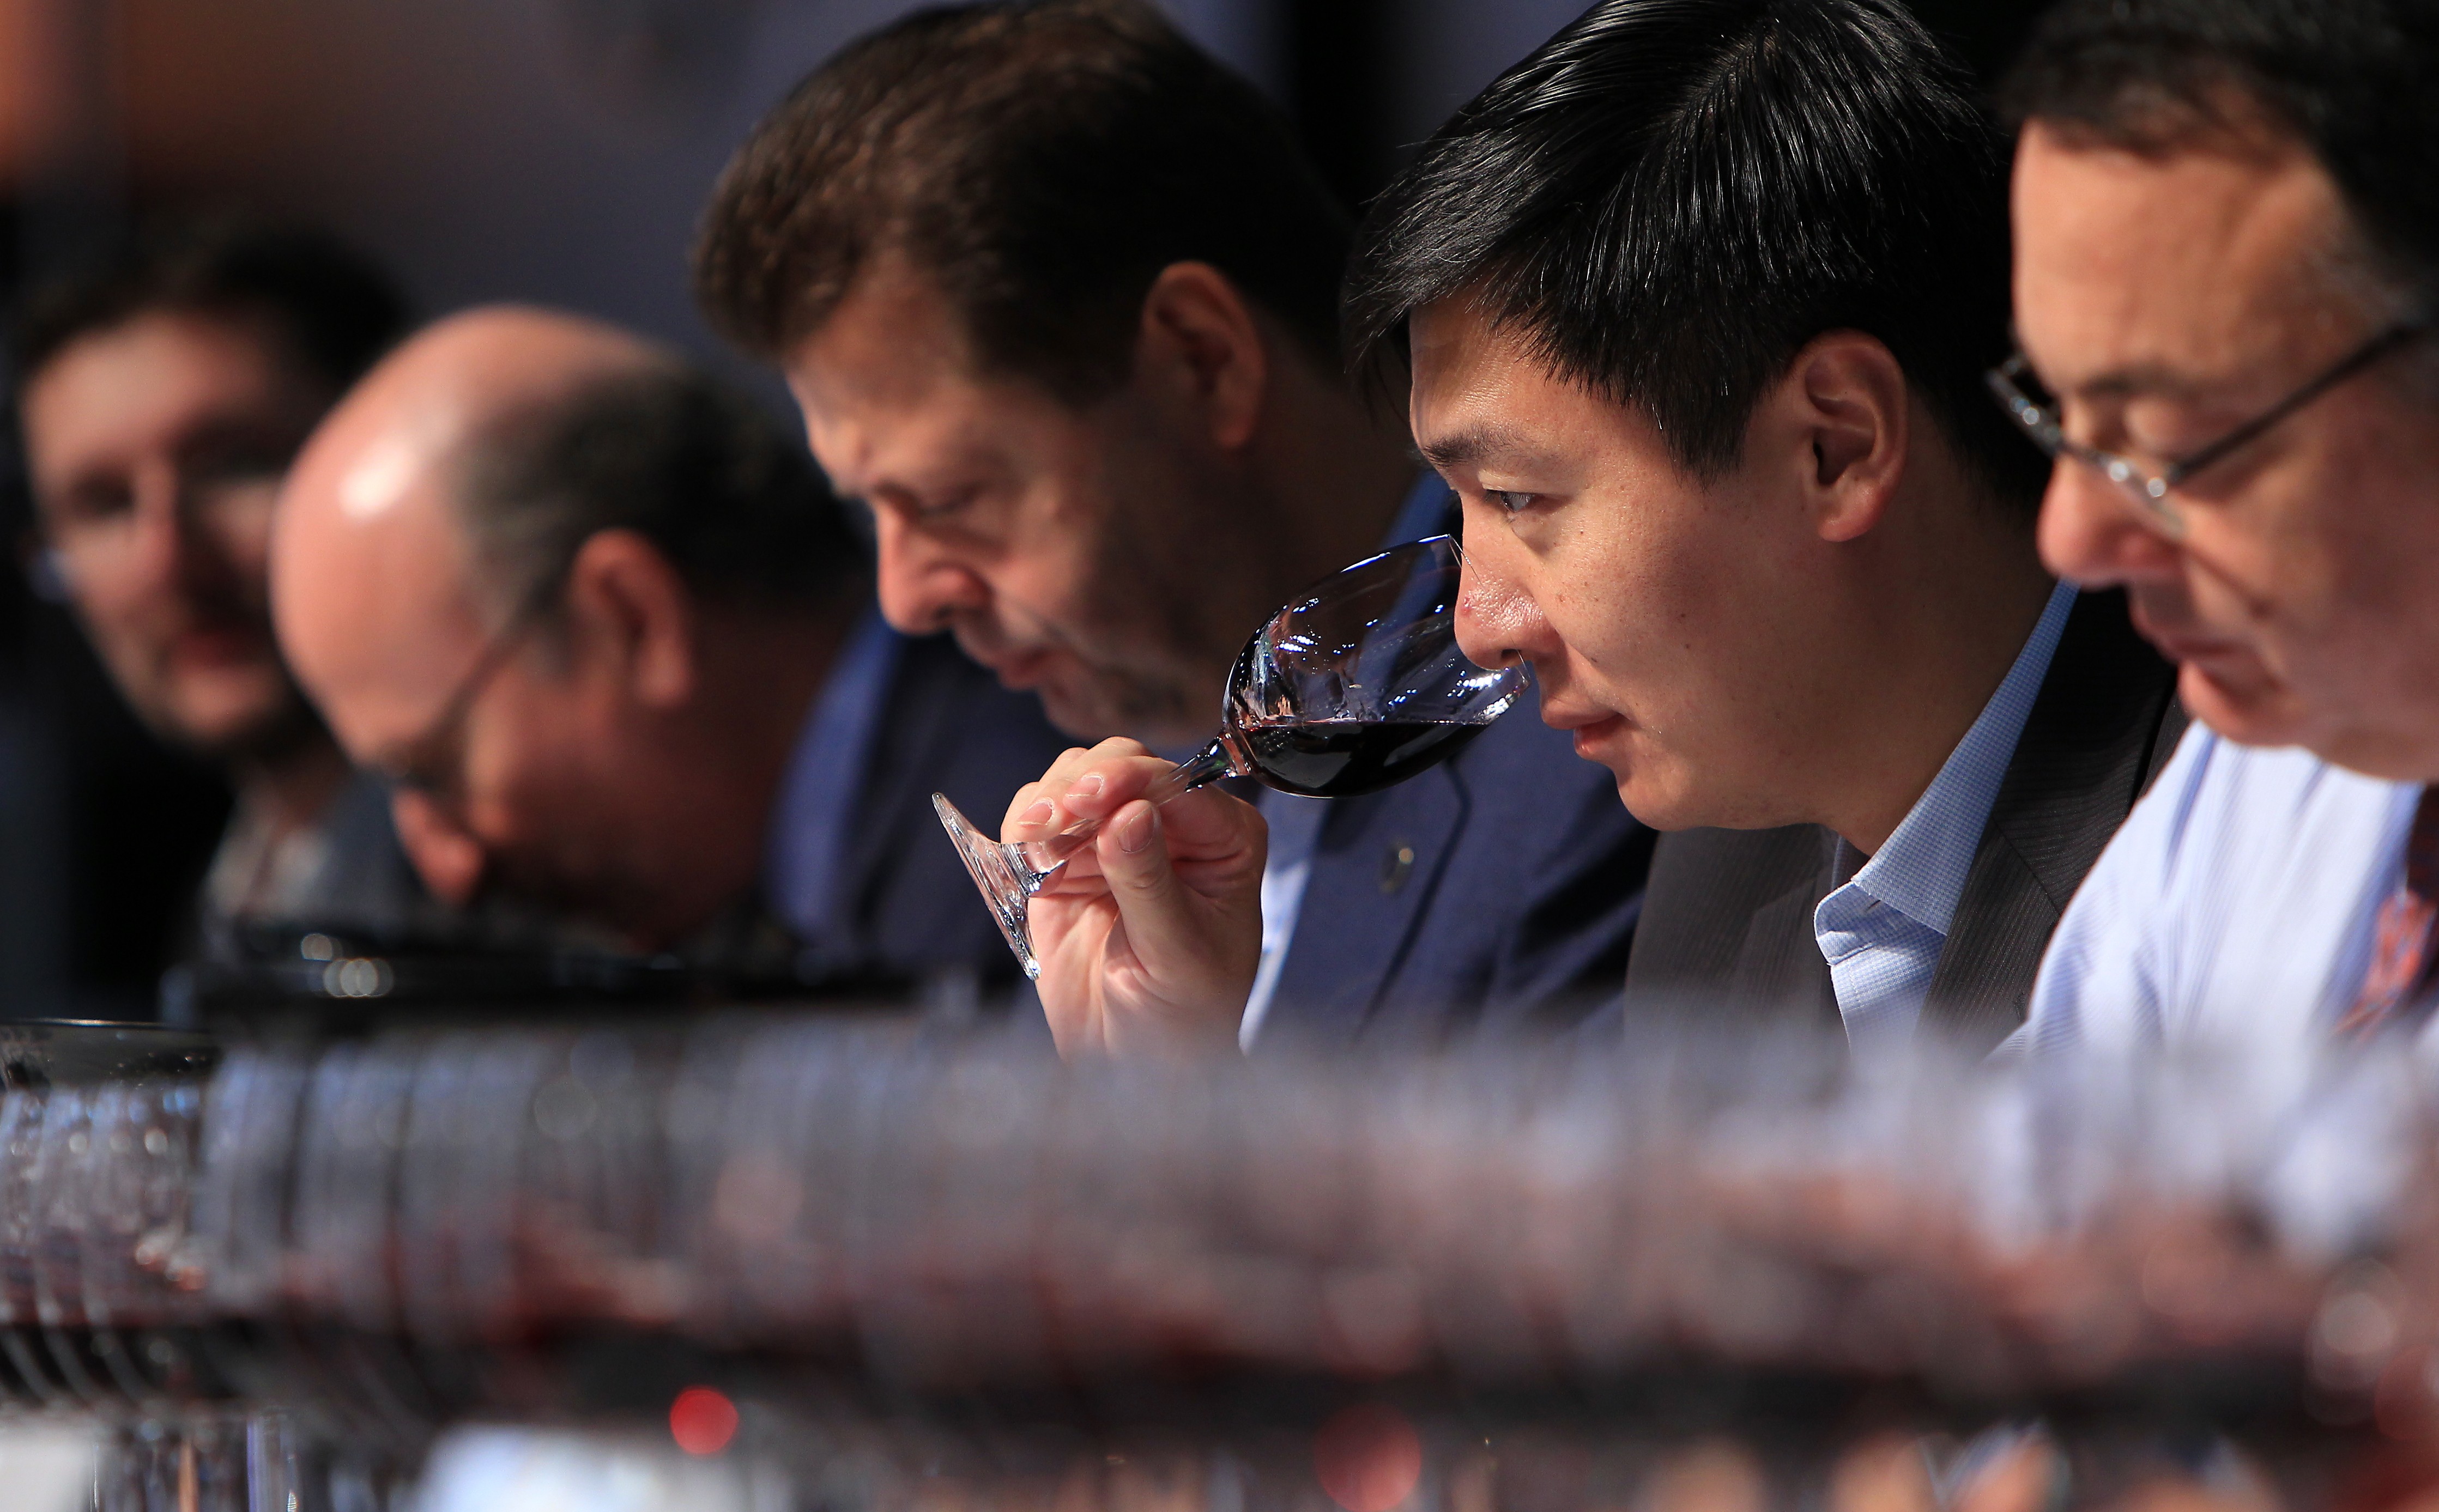 The experts called upon to oversee any wine competition may have different skills, but all follow fixed criteria to choose the winner. Picture: SCMP